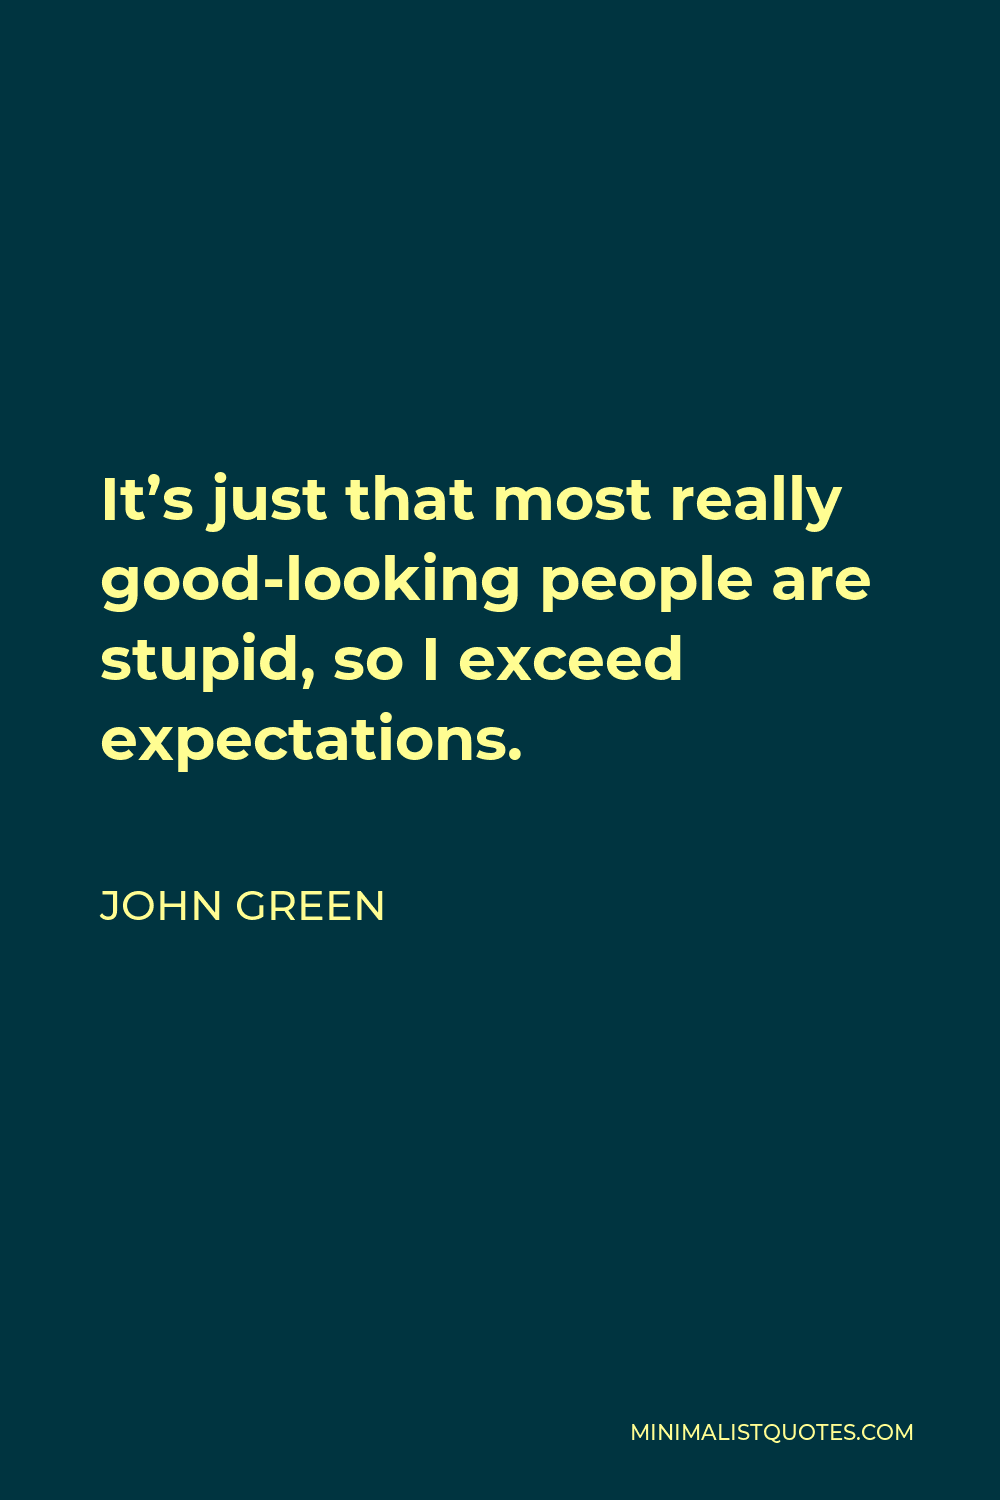 John Green Quote - It’s just that most really good-looking people are stupid, so I exceed expectations.